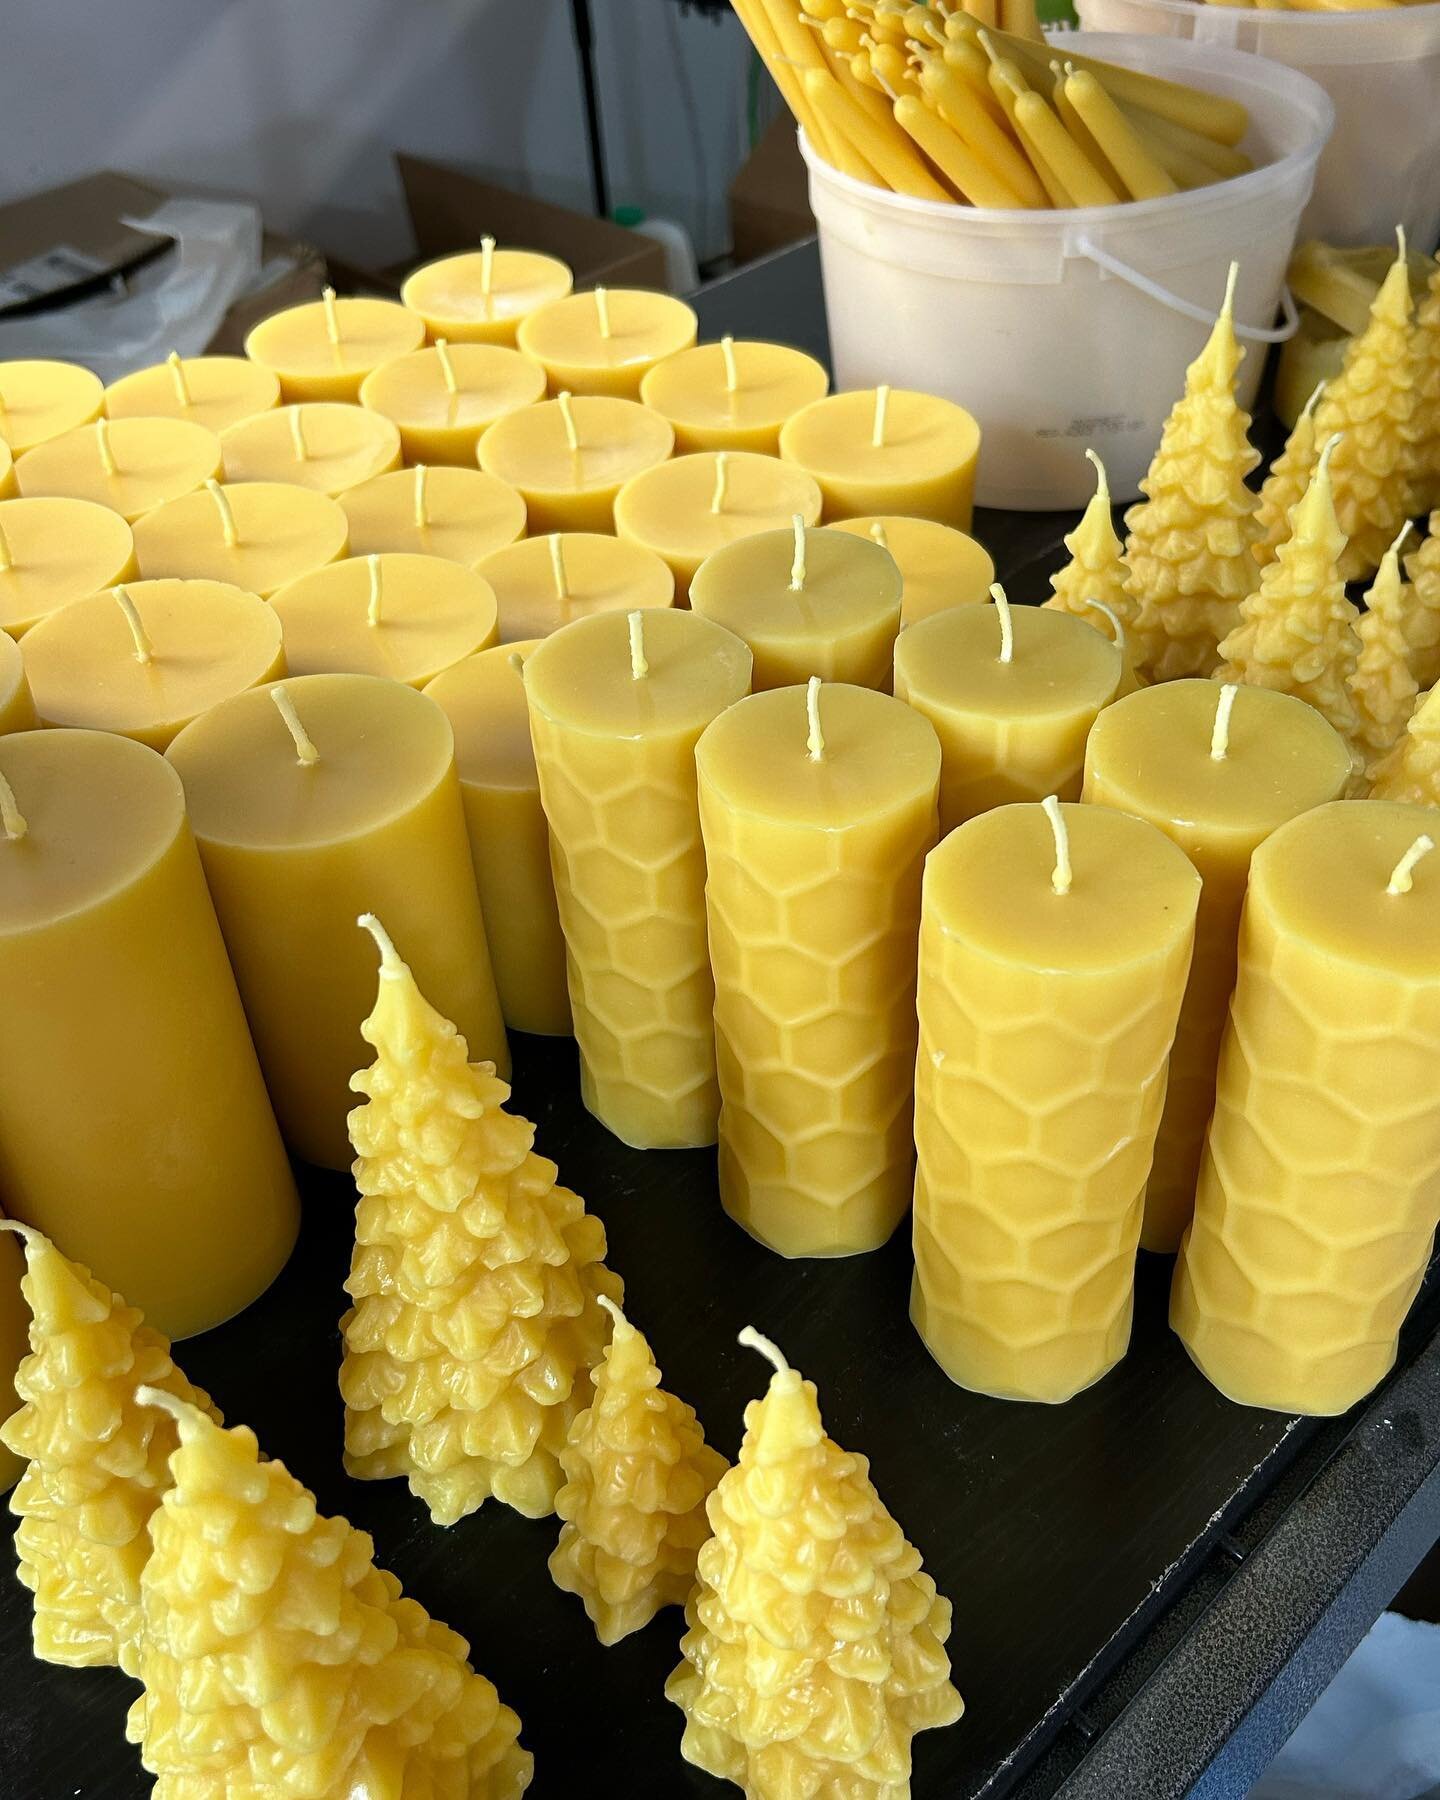 &ldquo;What do beekeepers do in winter?&rdquo; This may be our most frequently asked question. The list of what we do during the winter months is long, but making beeswax candles is at the top of the list.

These candles are handmade in small batches